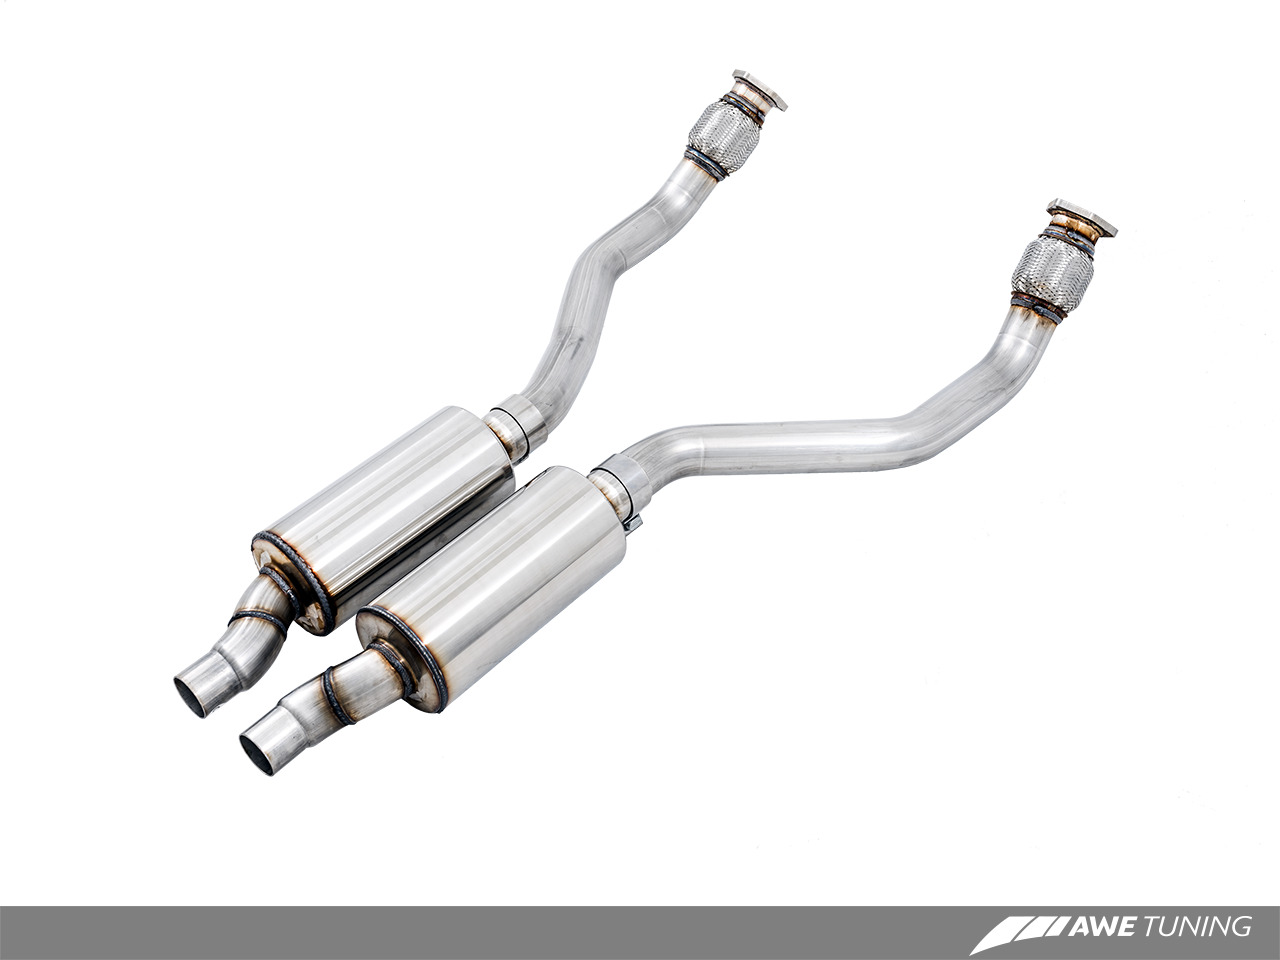 AWE Tuning Resonated Downpipes for Audi A6 / A7 / S4 / S5 3.0T 3215-11030